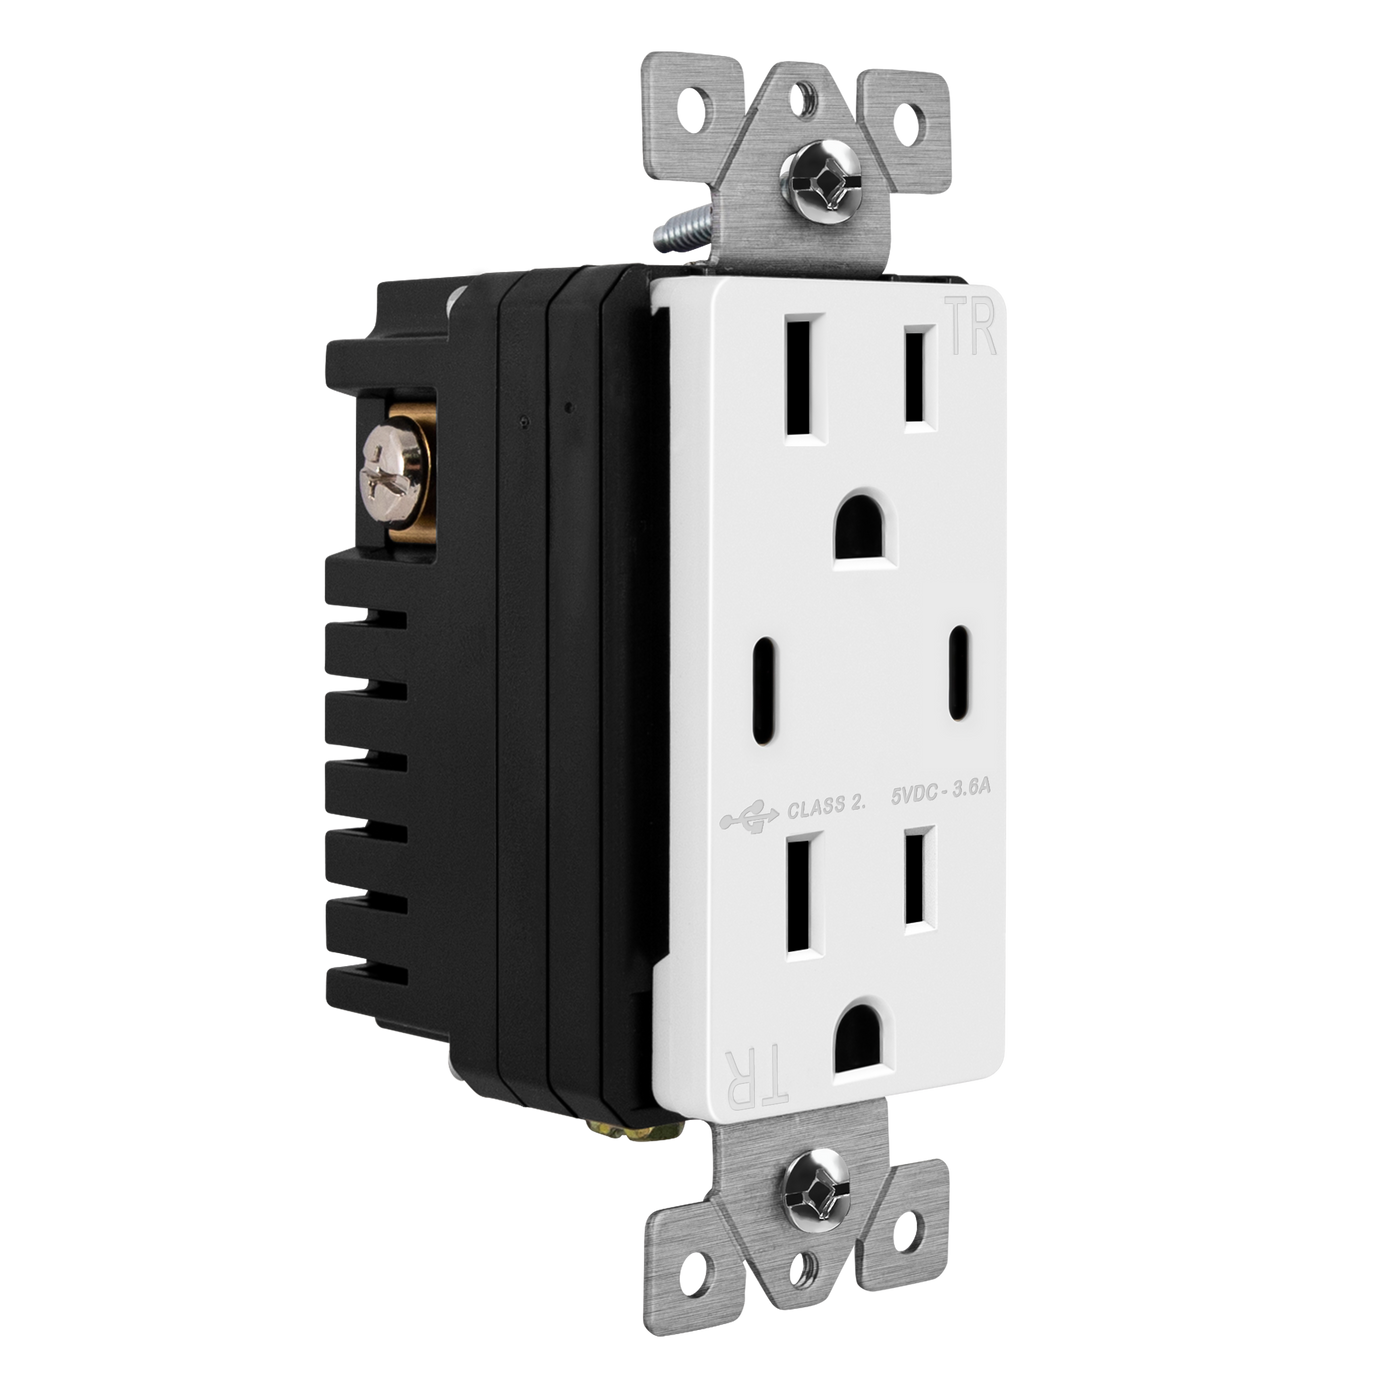 3.6A Dual USB Type C Wall Outlet Charger with 15A Tamper-Resistant Receptacle